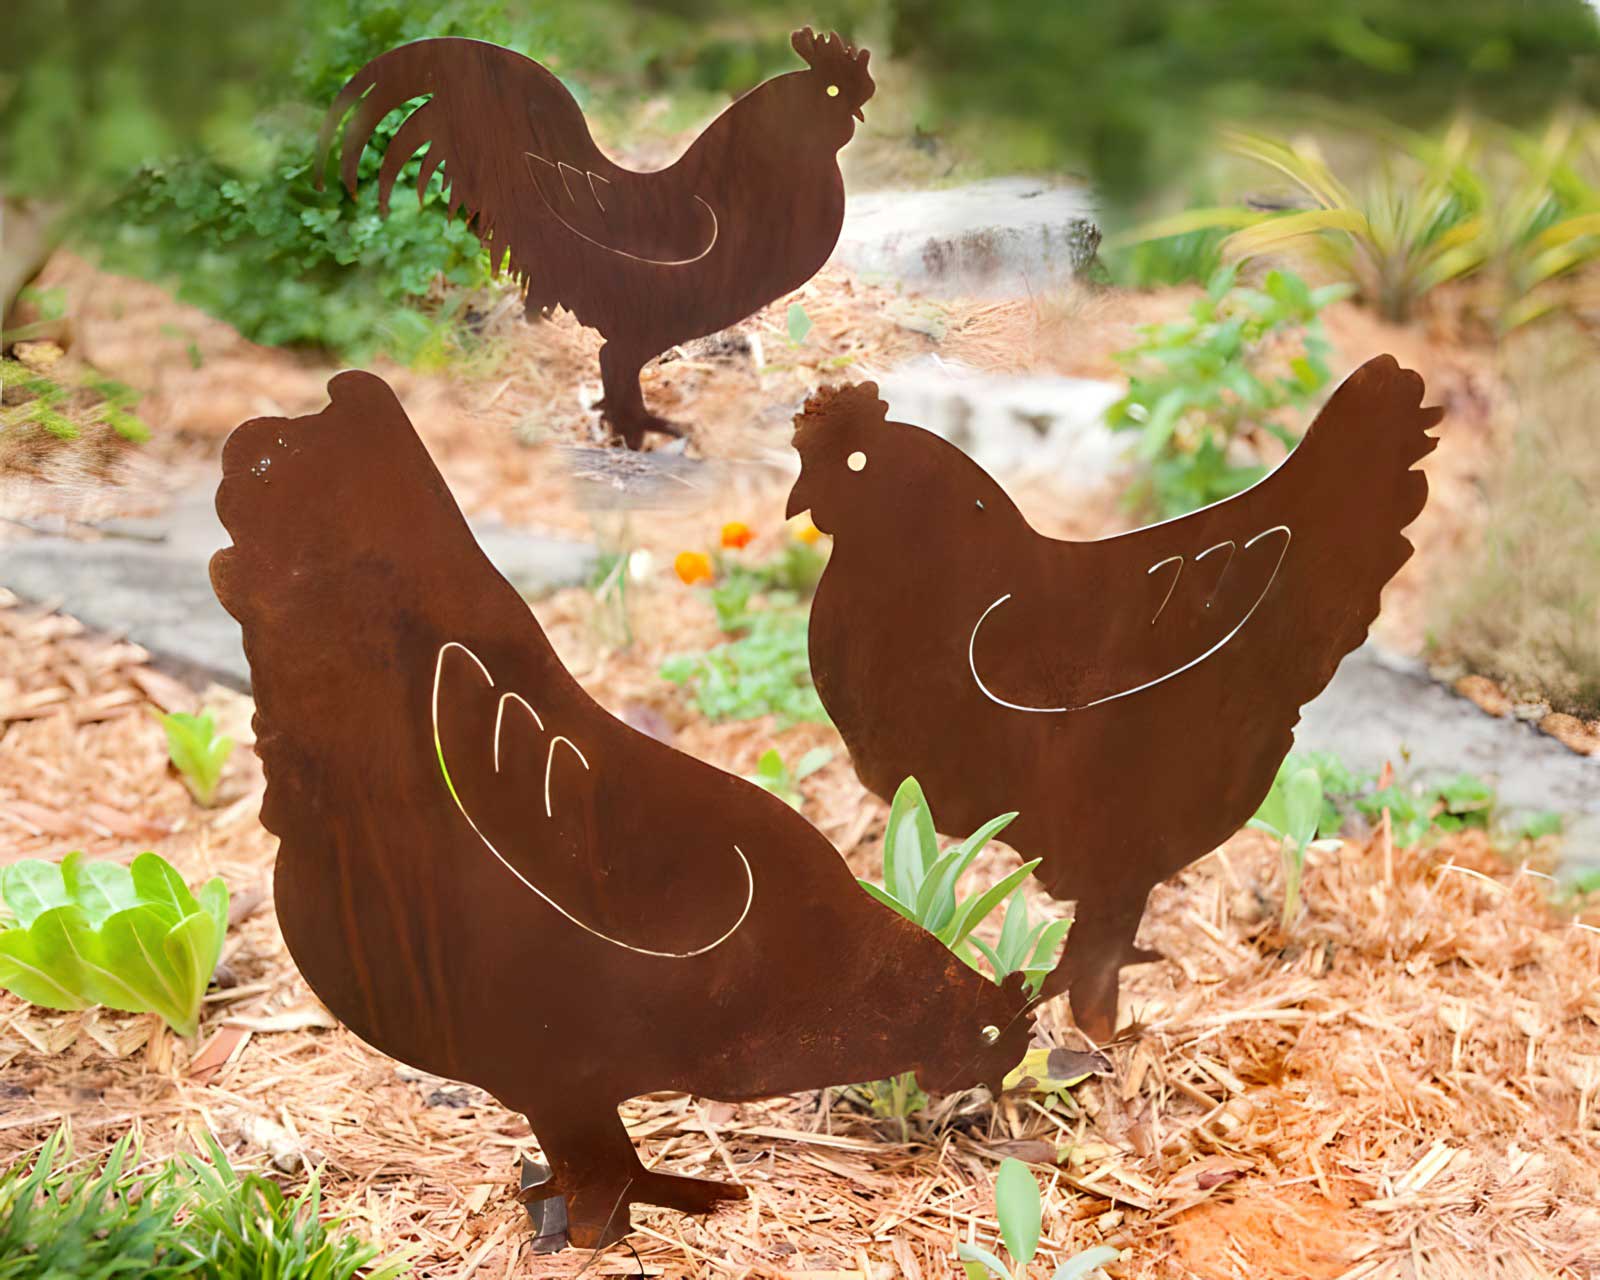 Rooster and two hens, whimsical decorative garden art